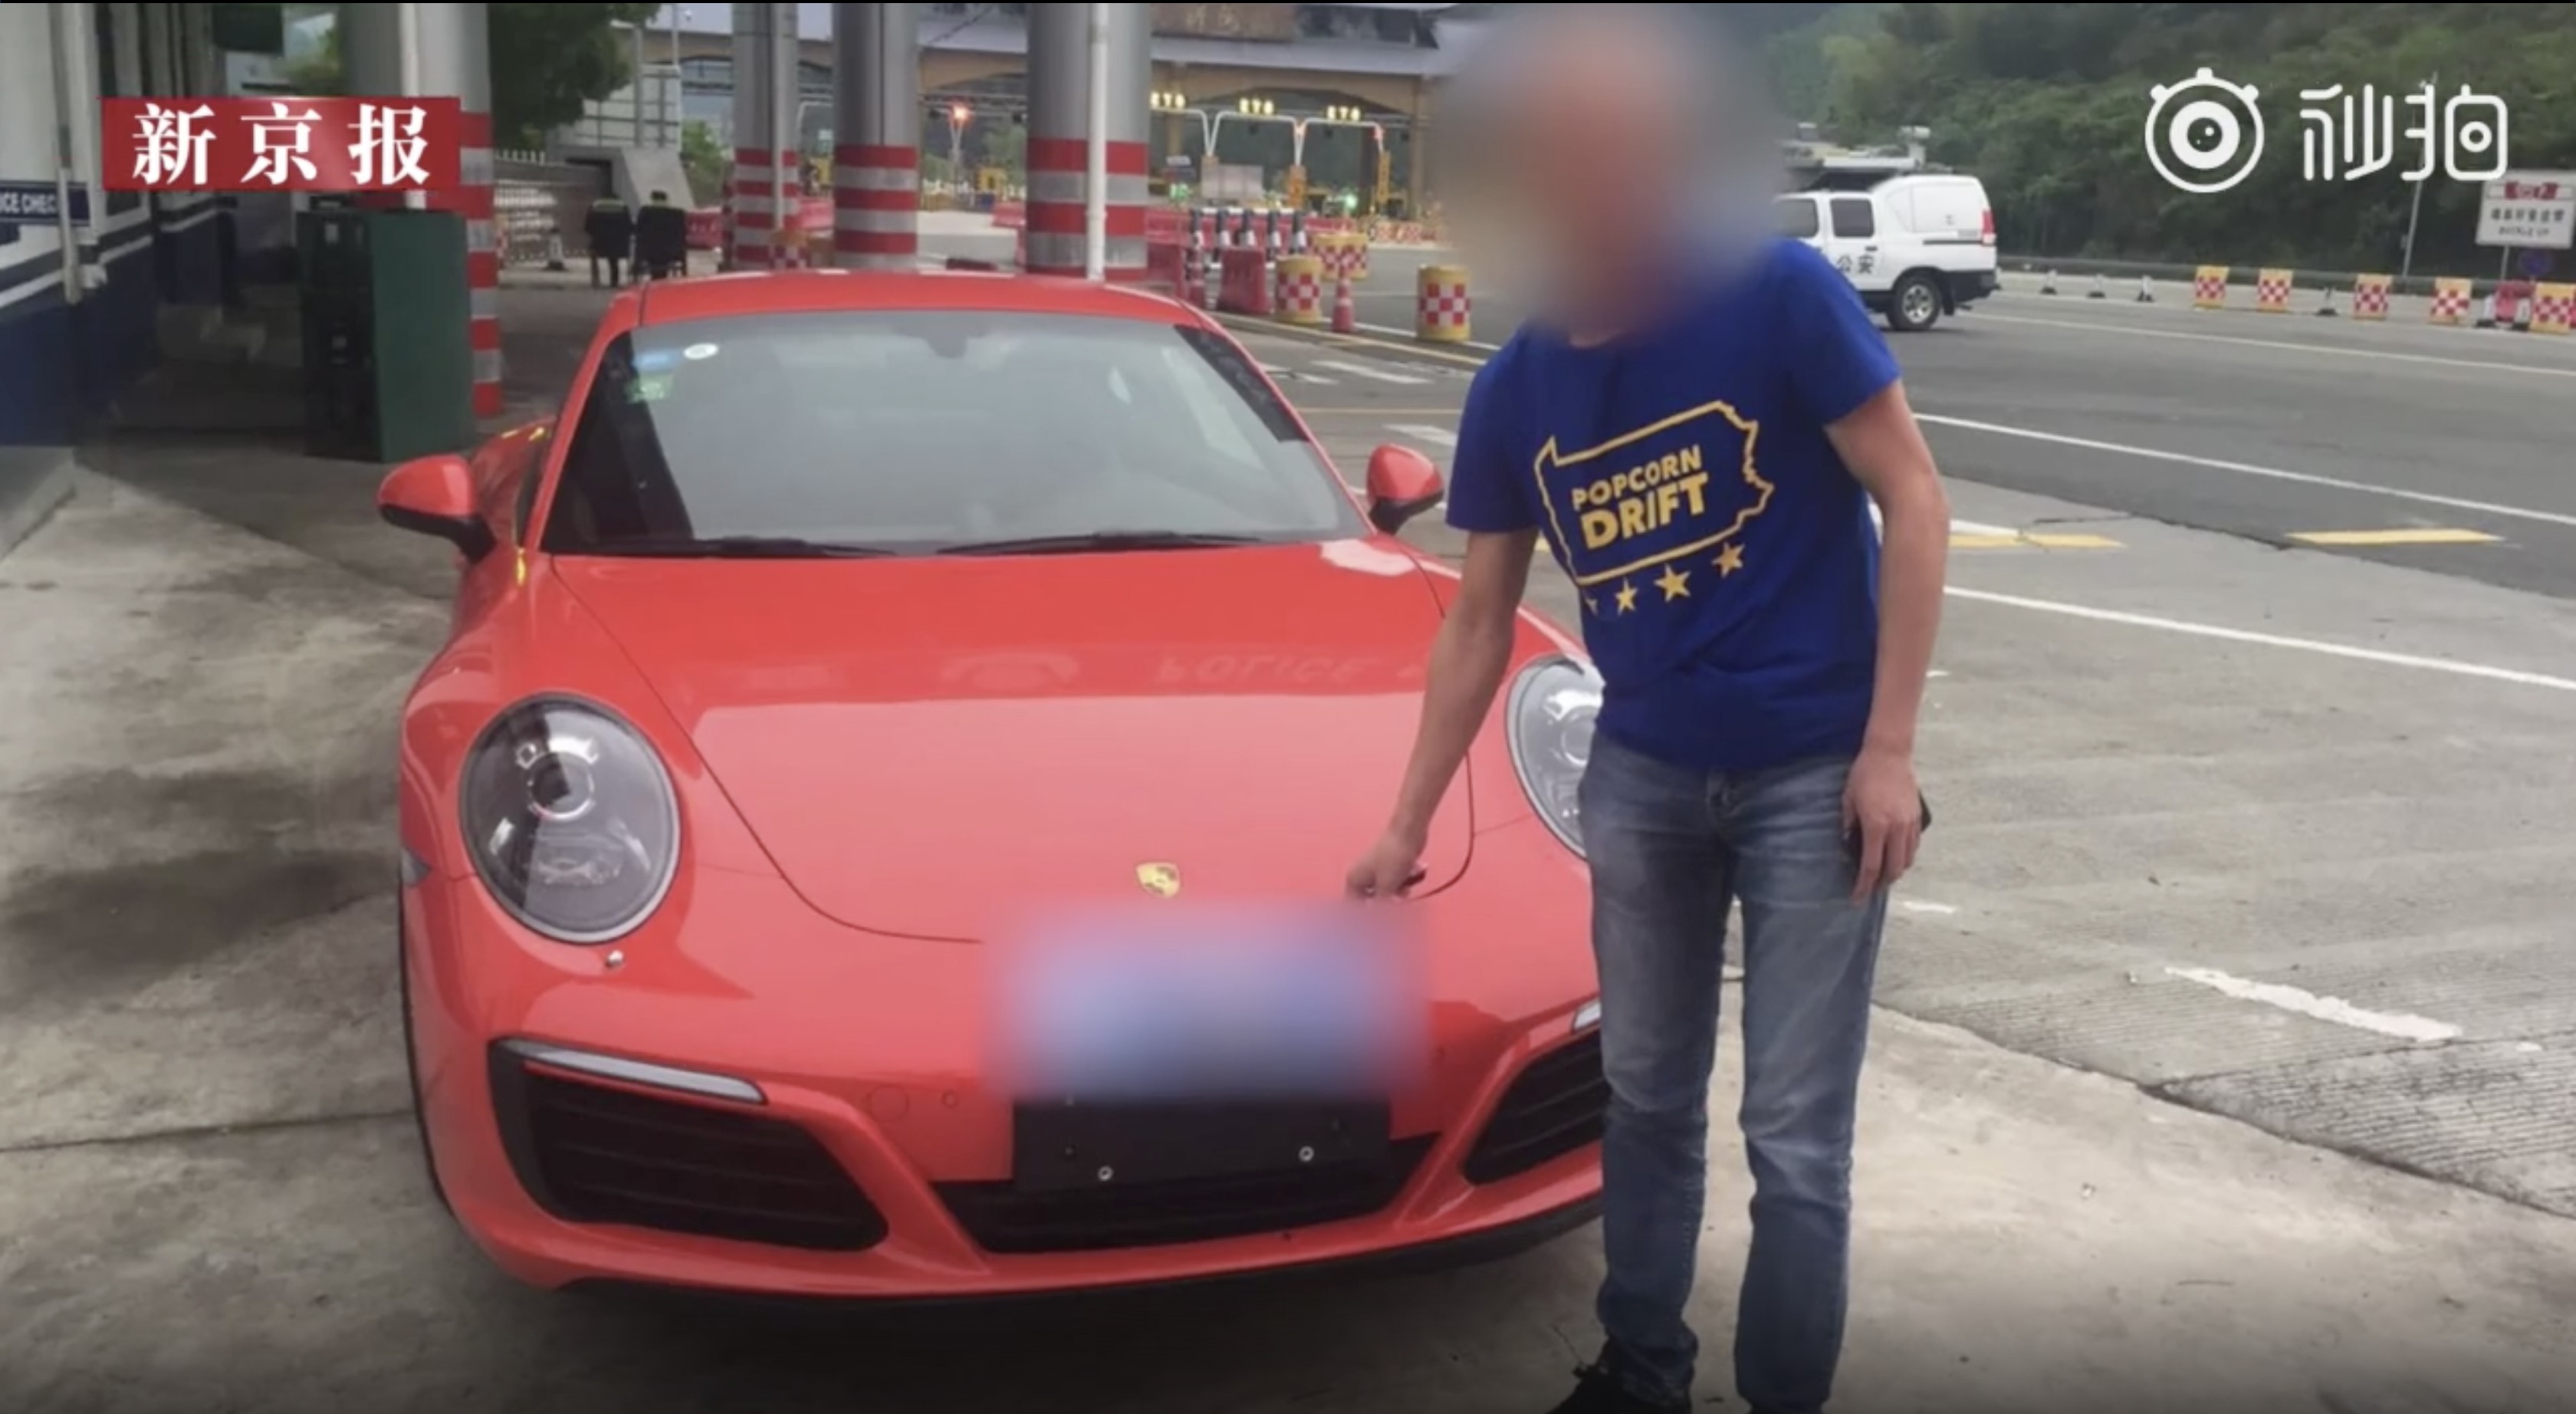 A motorist in Zhejiang province must retake a driver education exam after he drove his new Porsche with out-of-date number plates. Photo: Miaopai